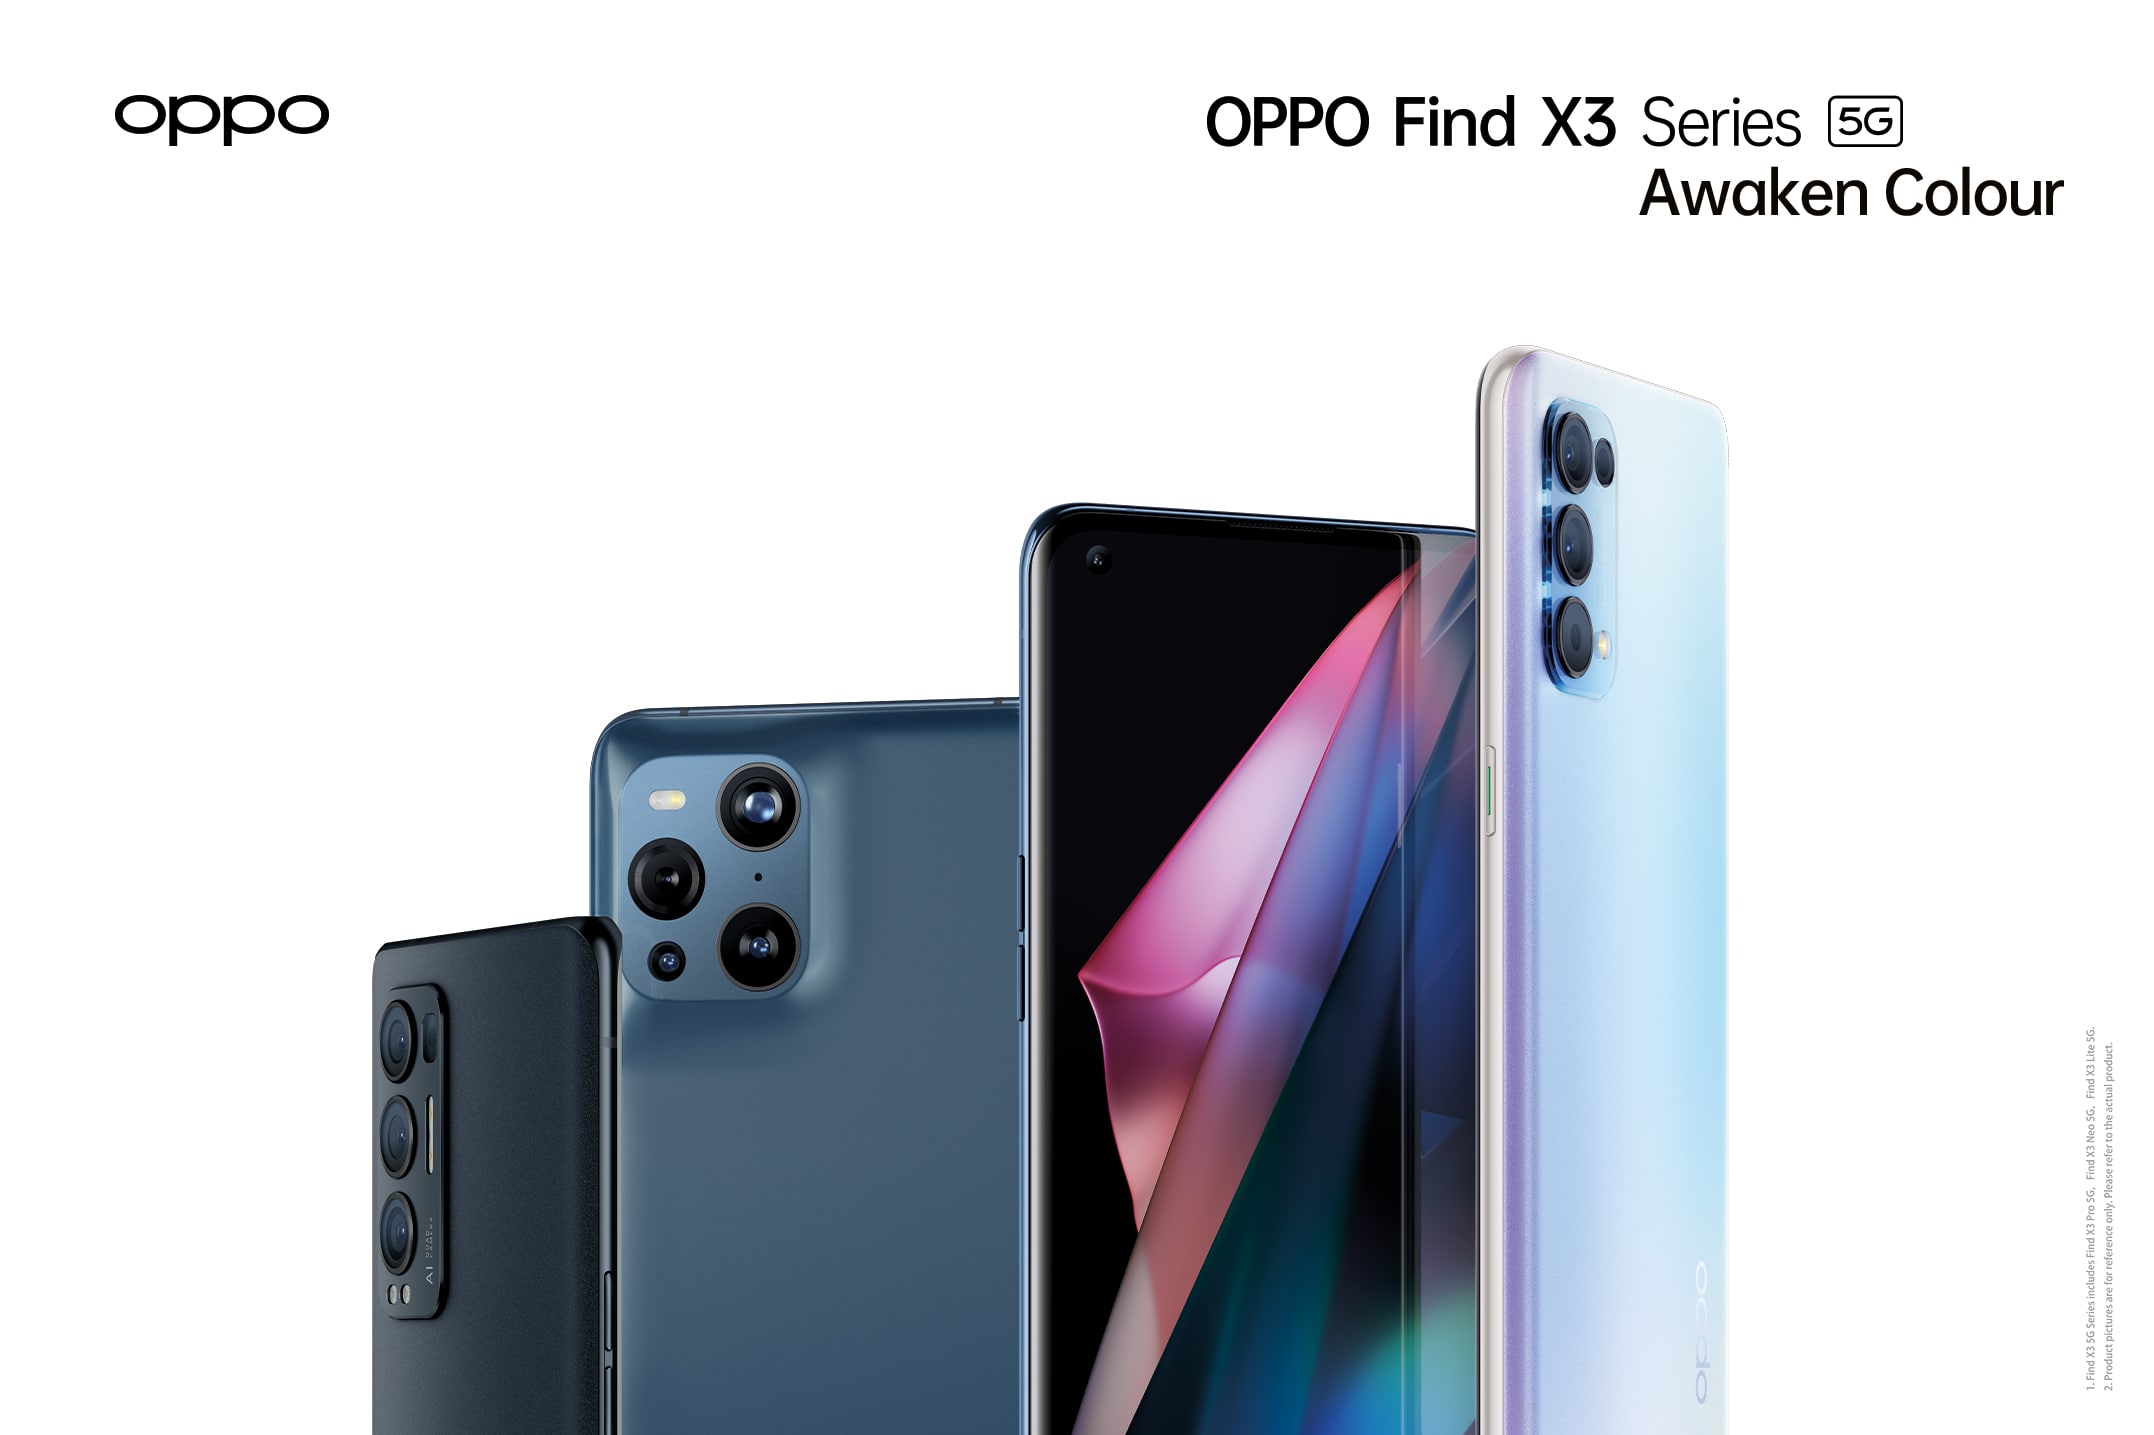 The OPPO Find X3 series of phones